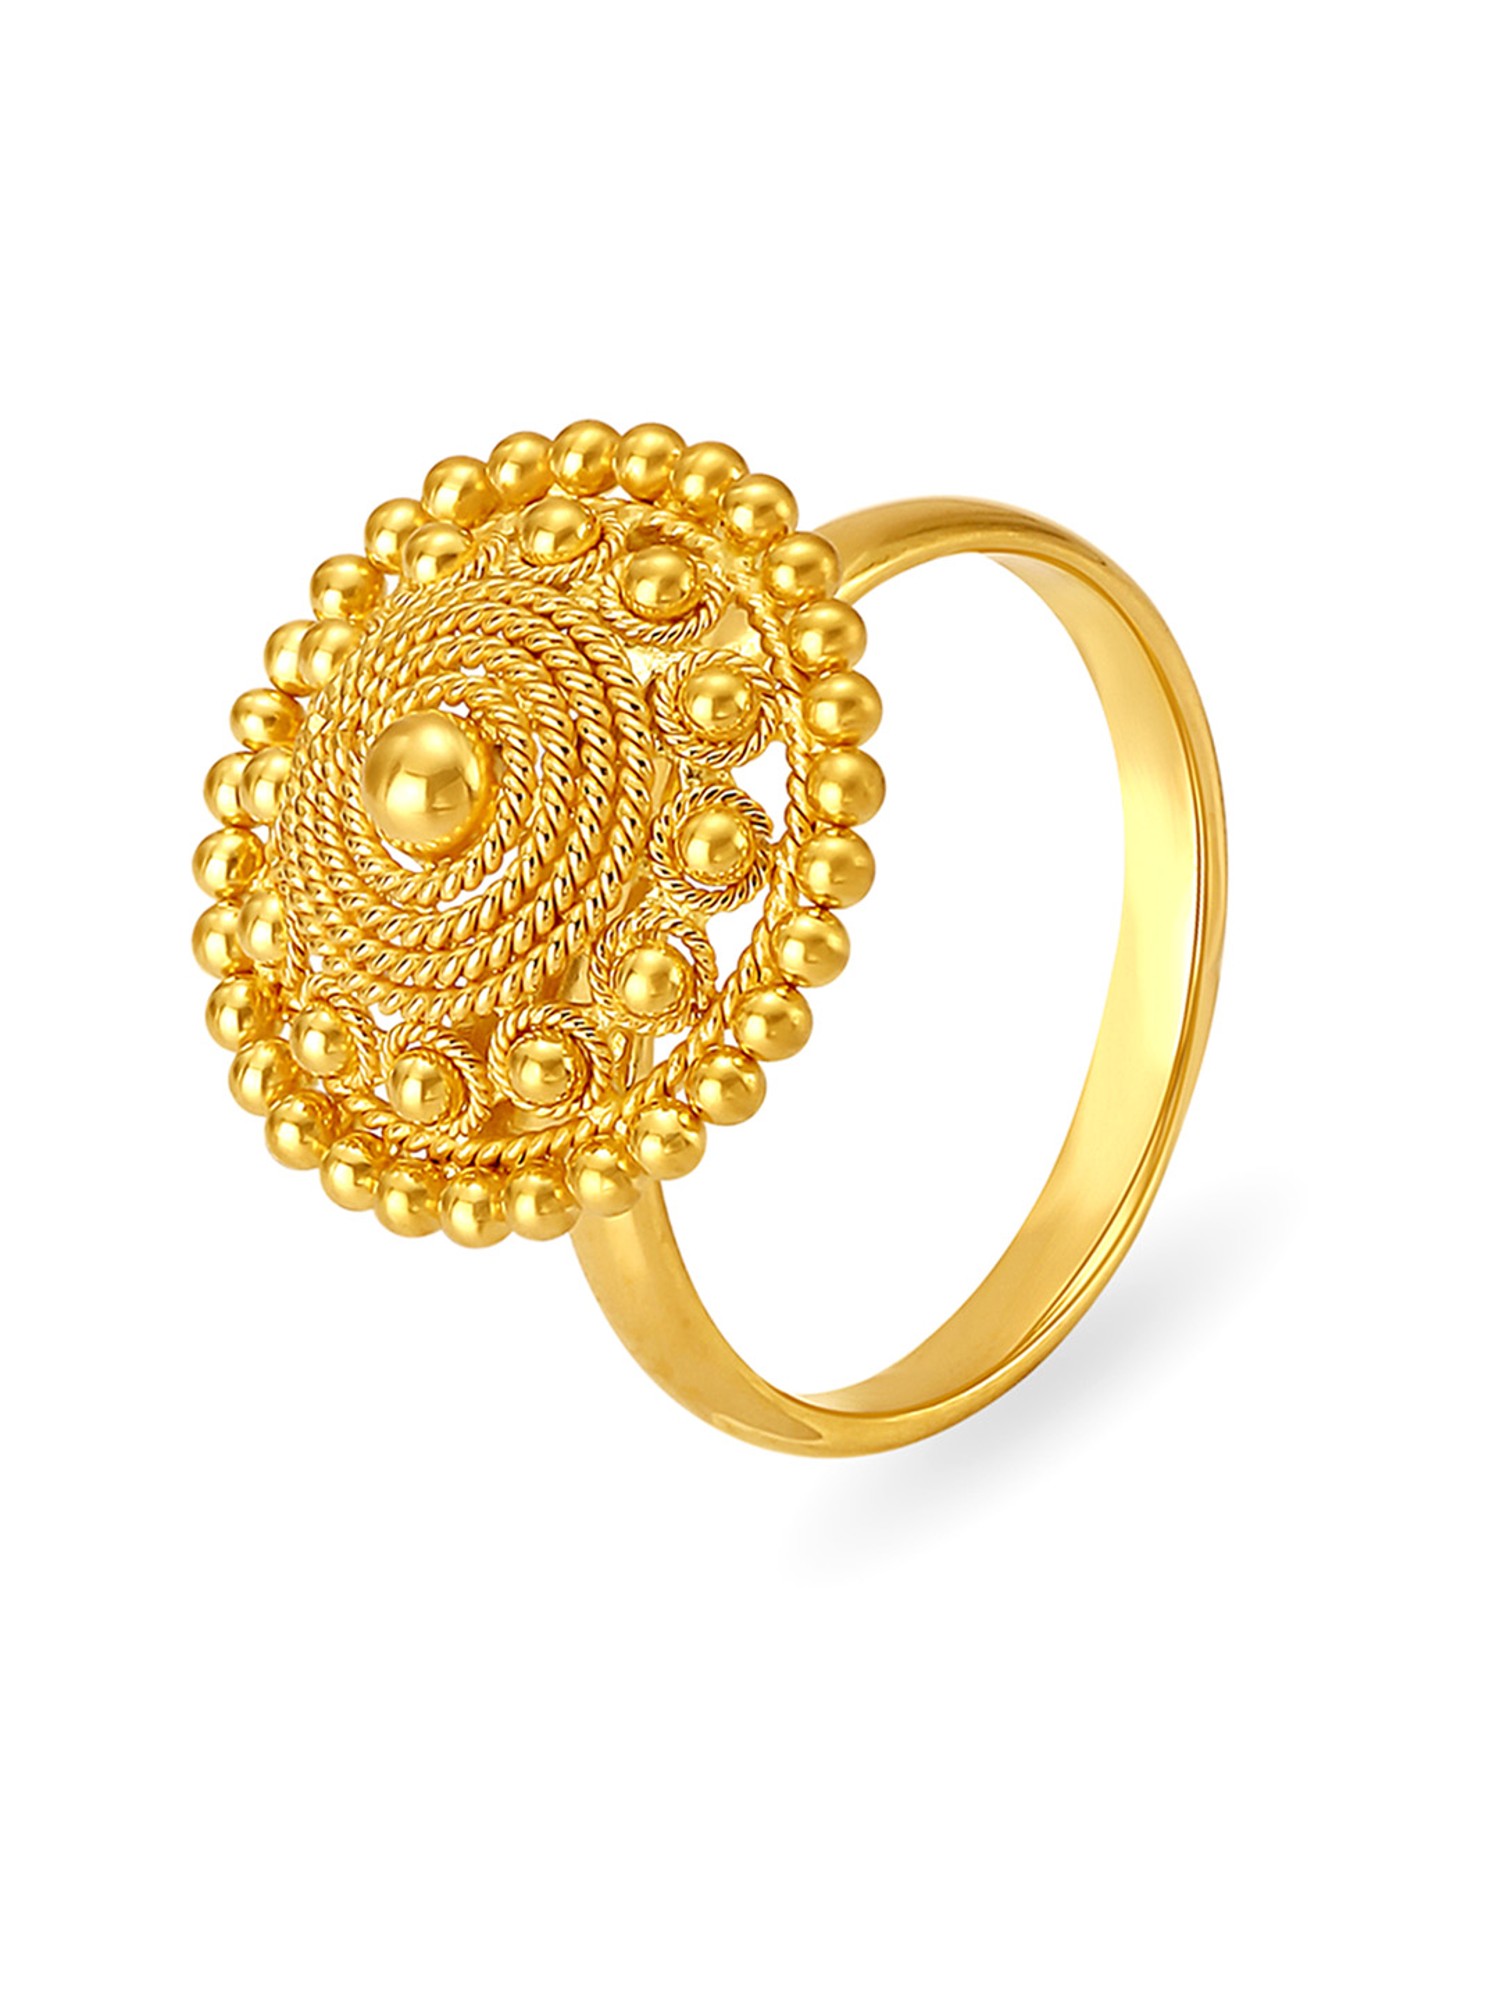 Charming Minimalistic Gold Ring for Men